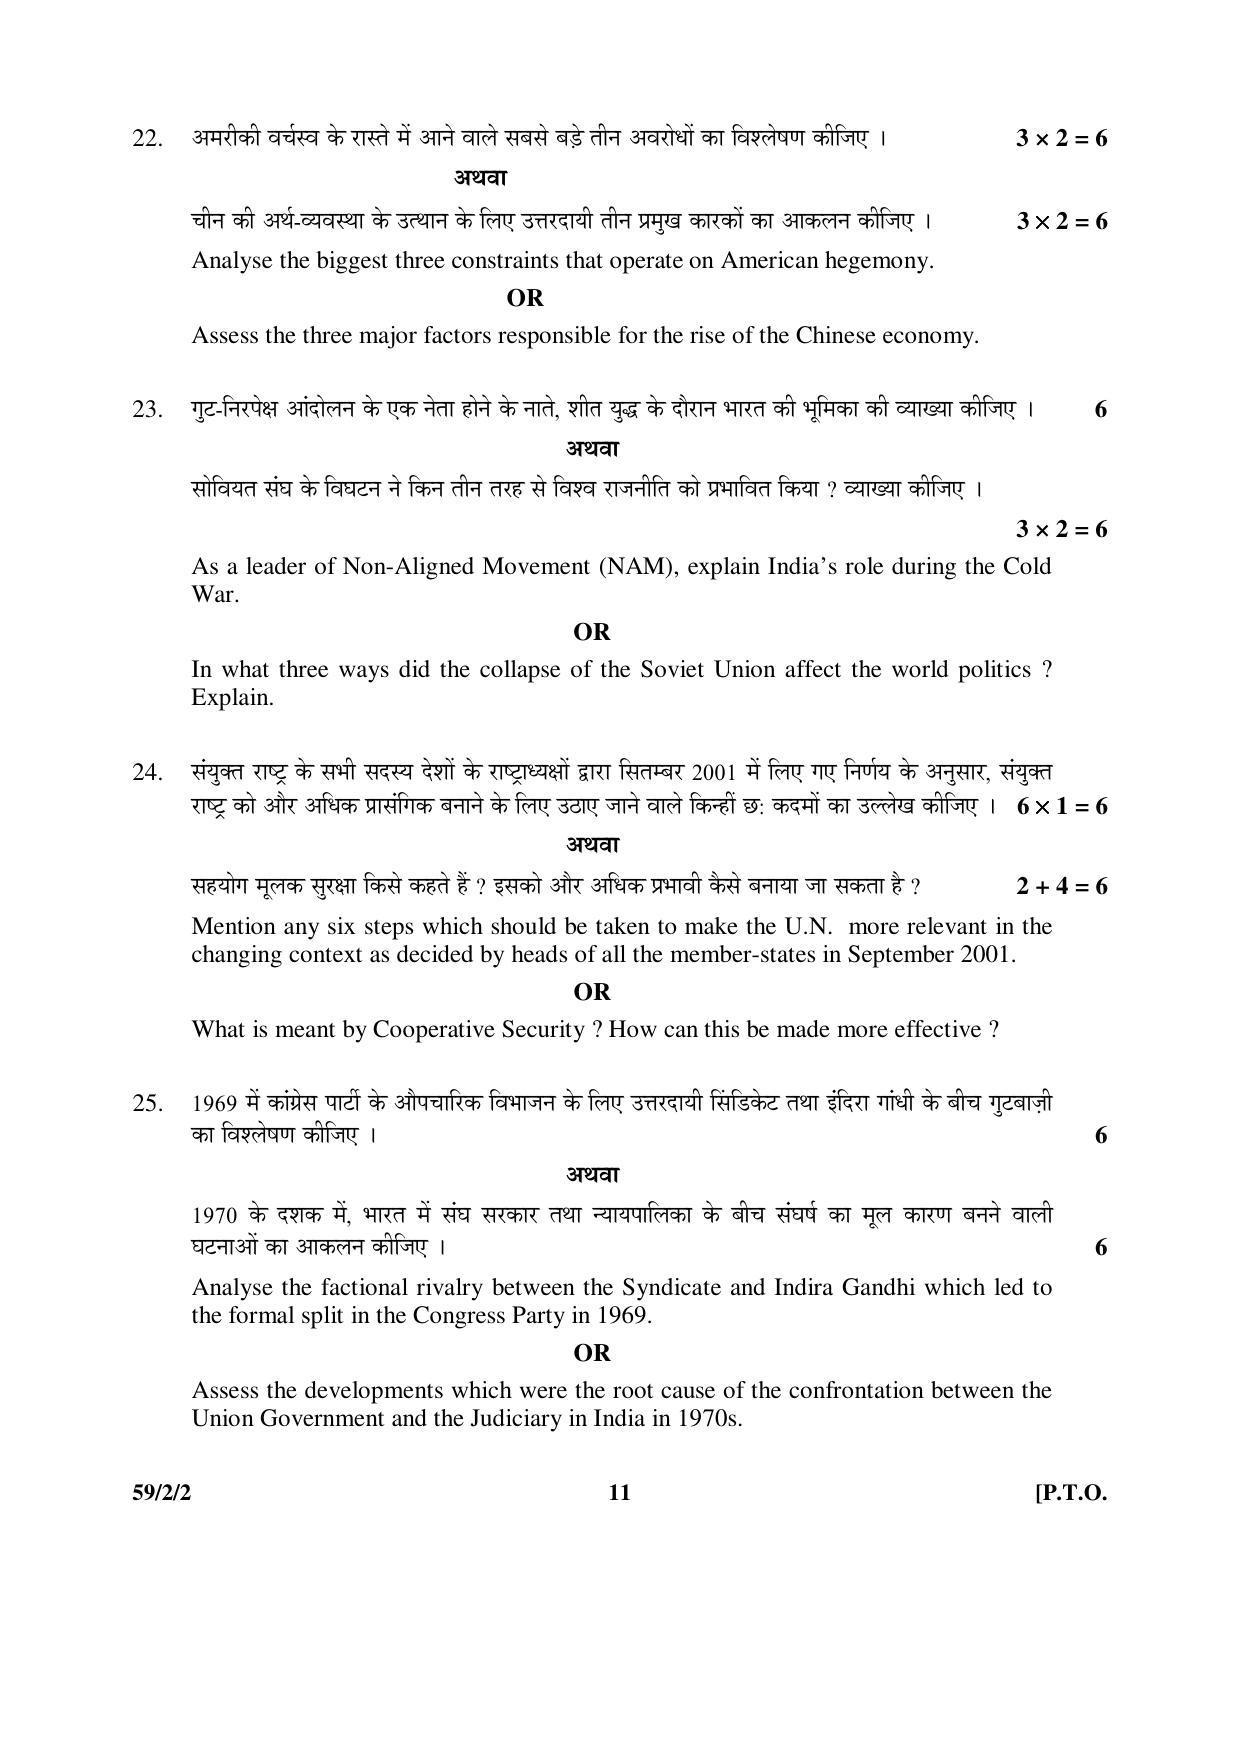 CBSE Class 12 59-2-2 _Political Science 2016 Question Paper - Page 11